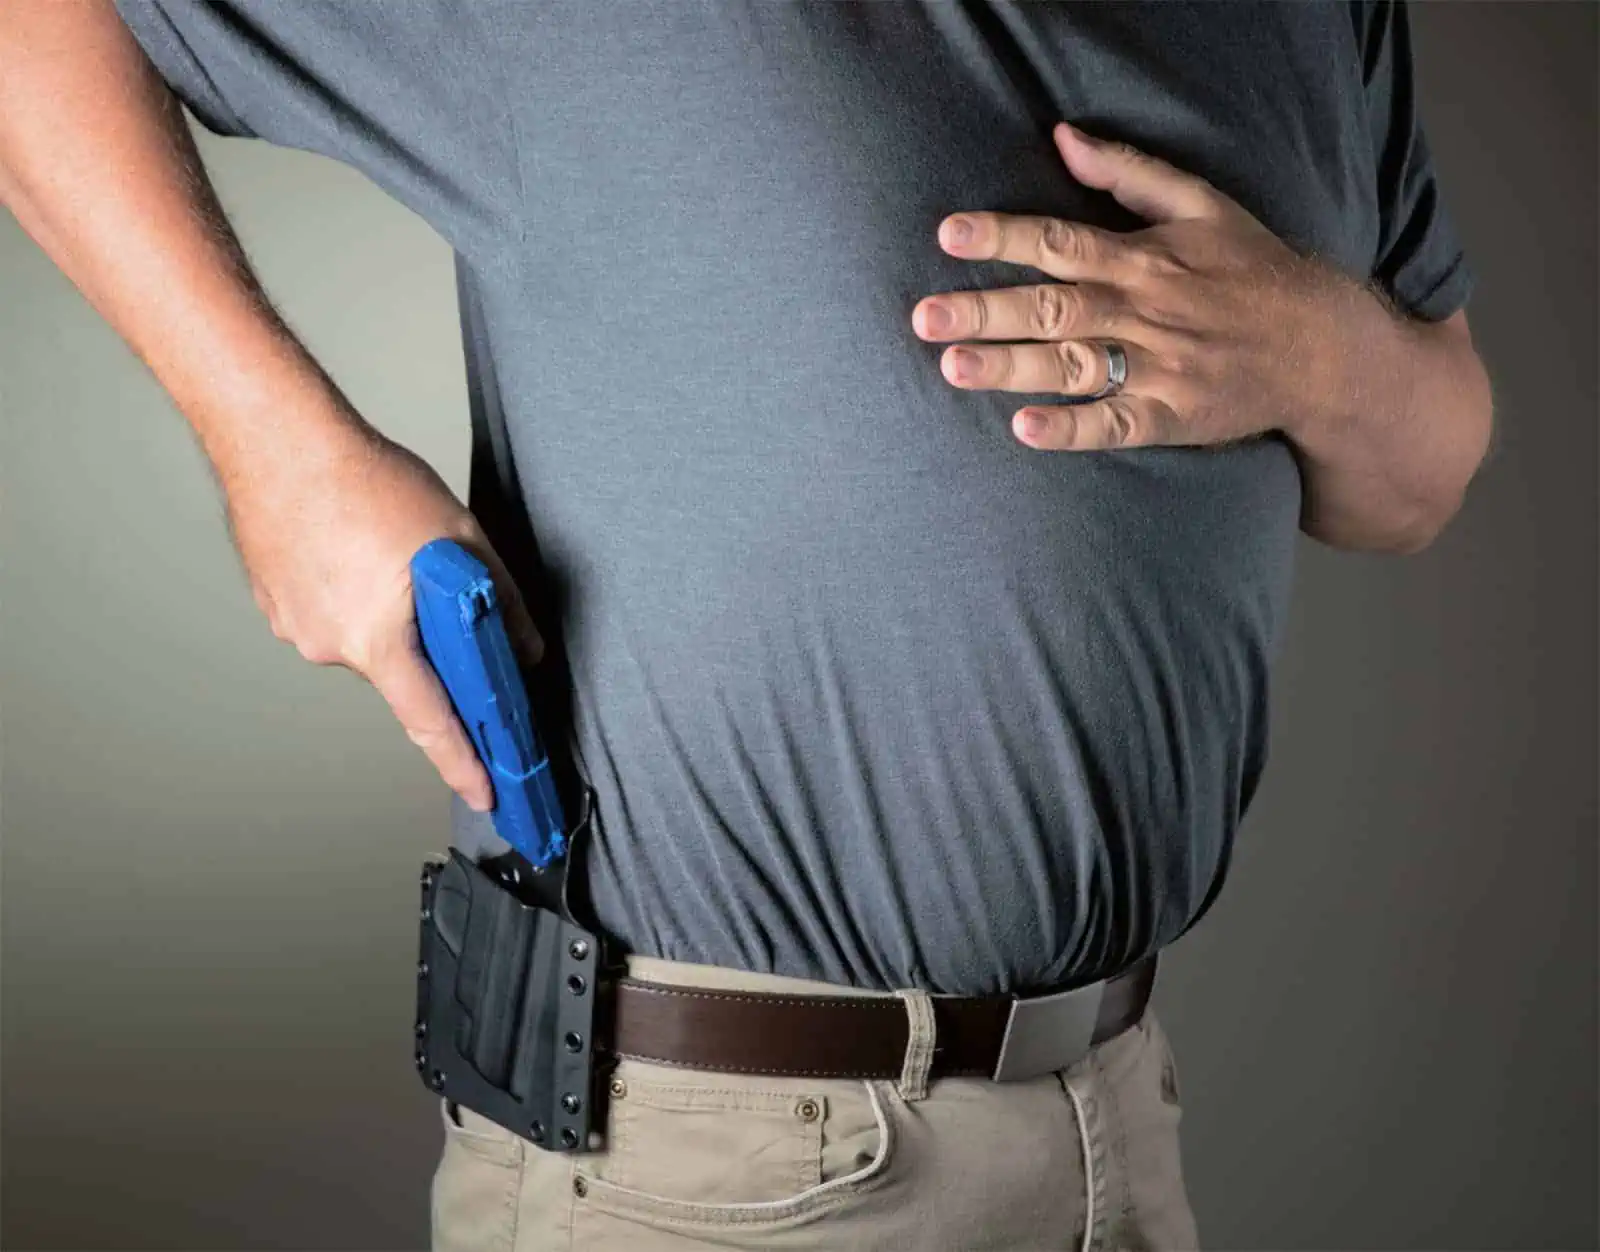 Appendix Carry  How to Carry AIWB [Updated 2022]